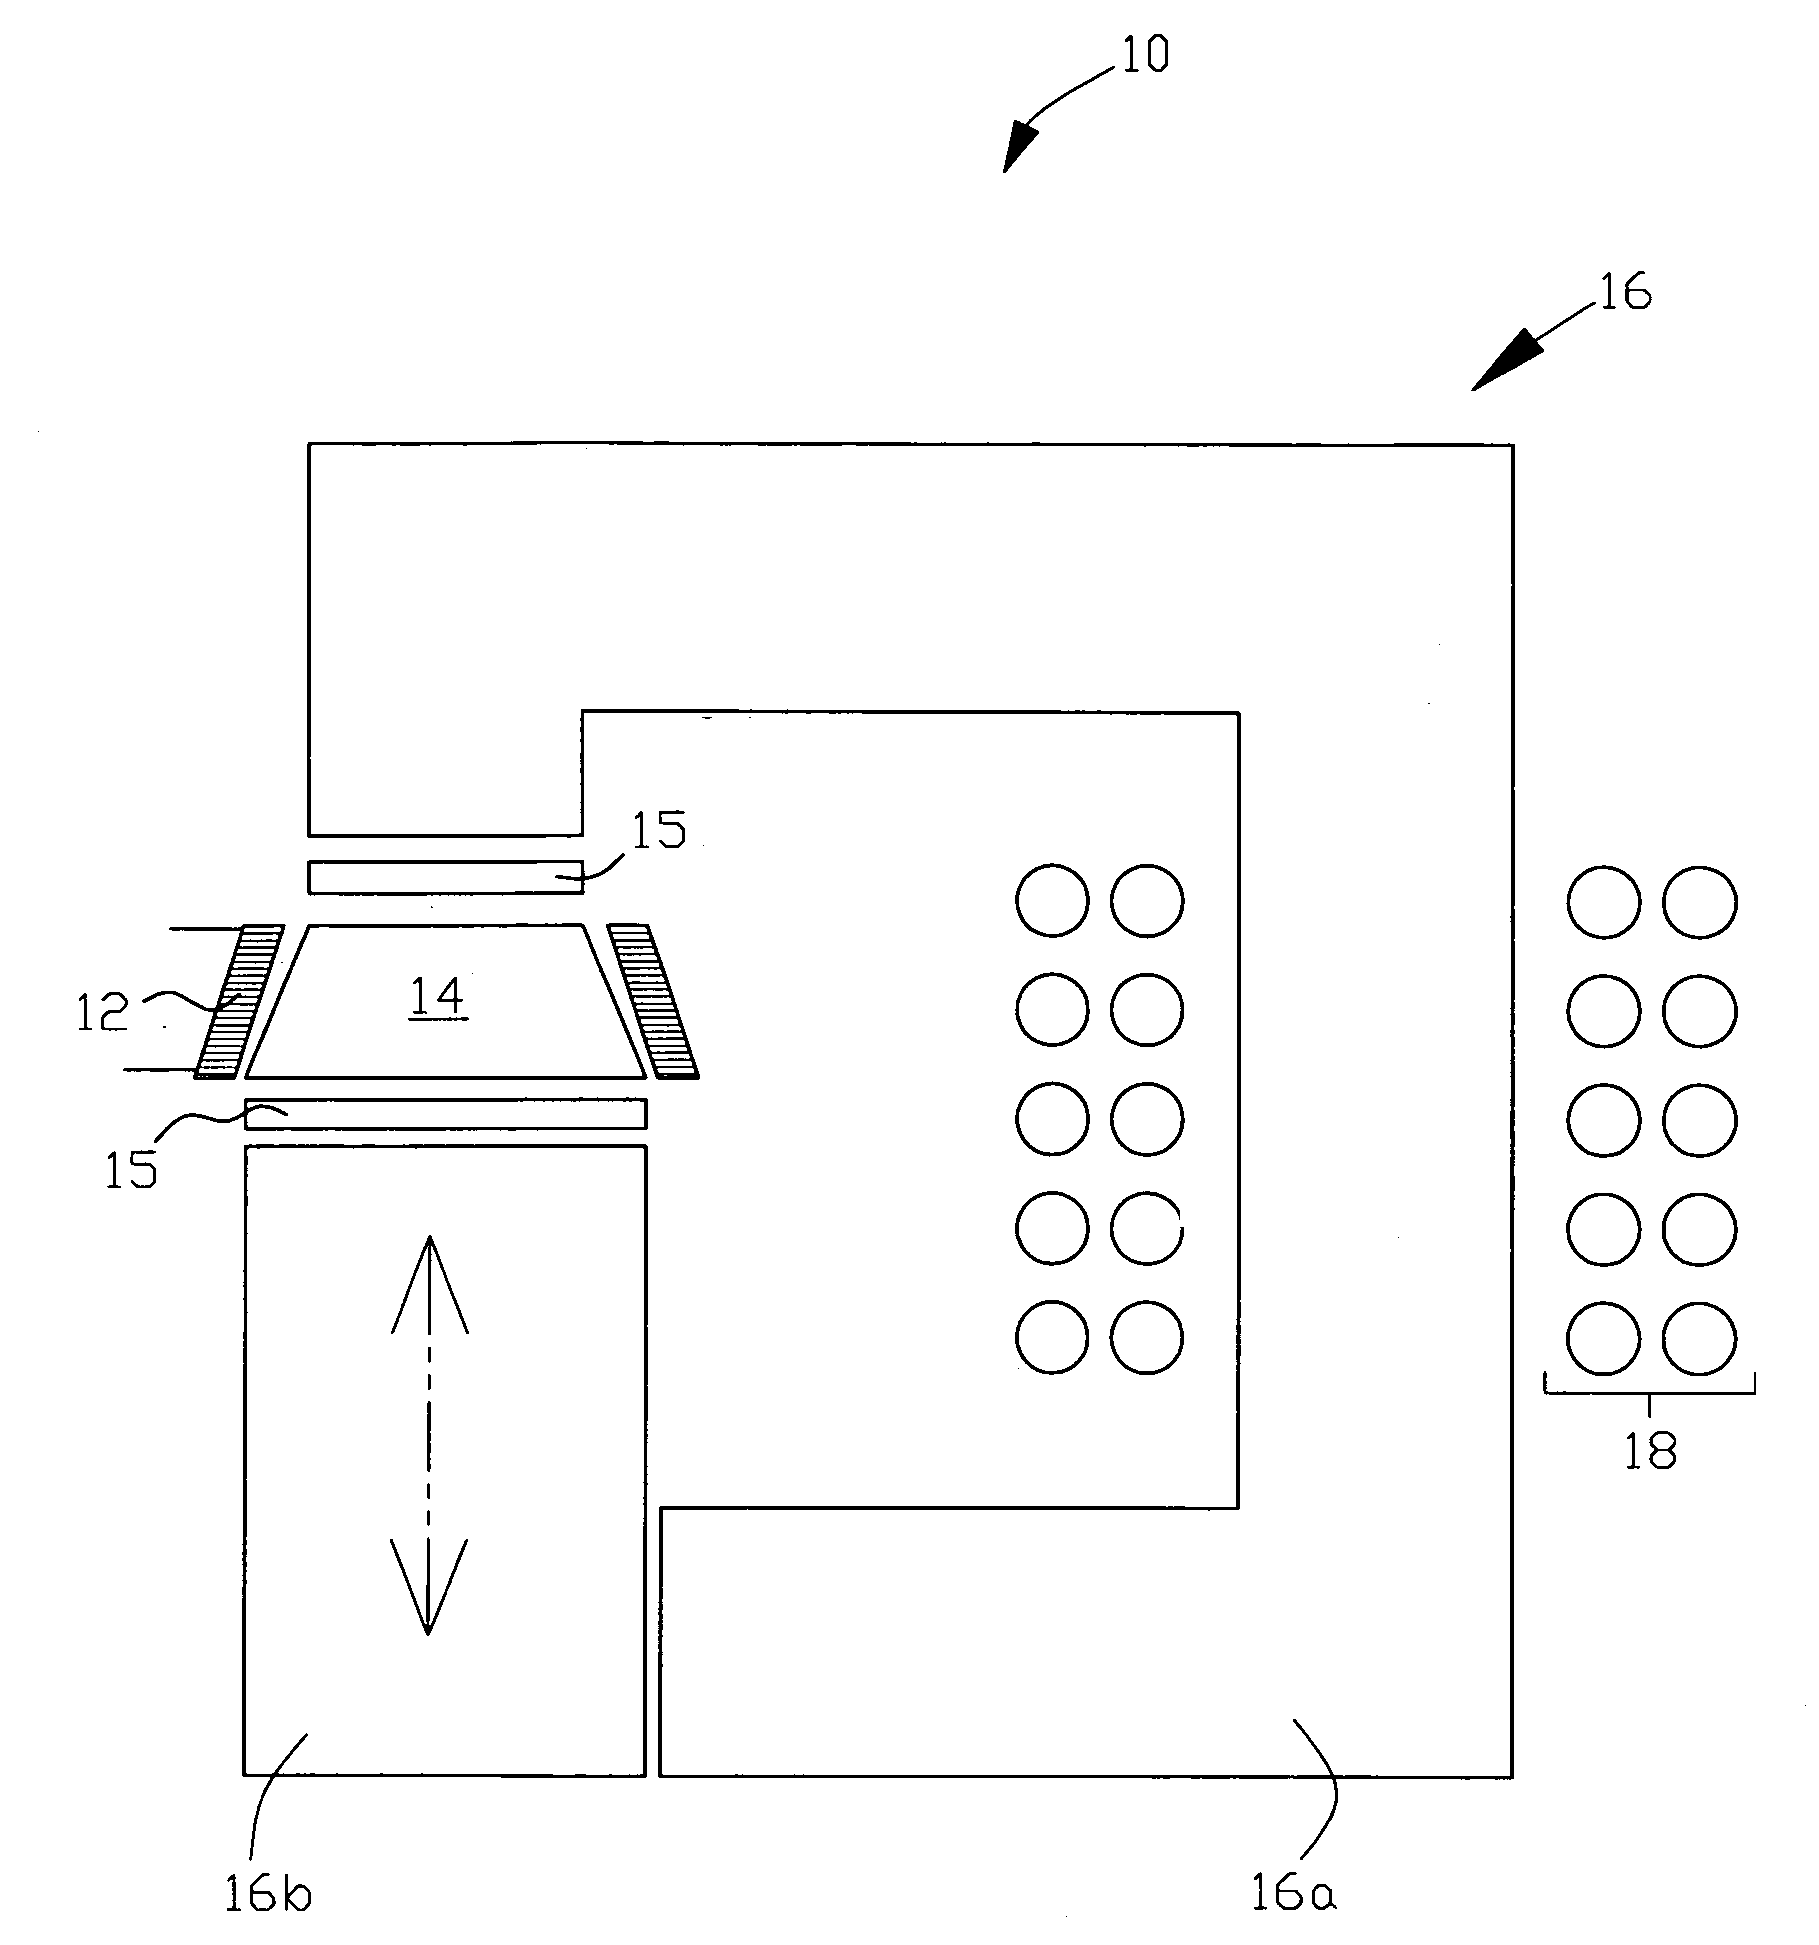 Multi-frequency heat treatment of a workpiece by induction heating